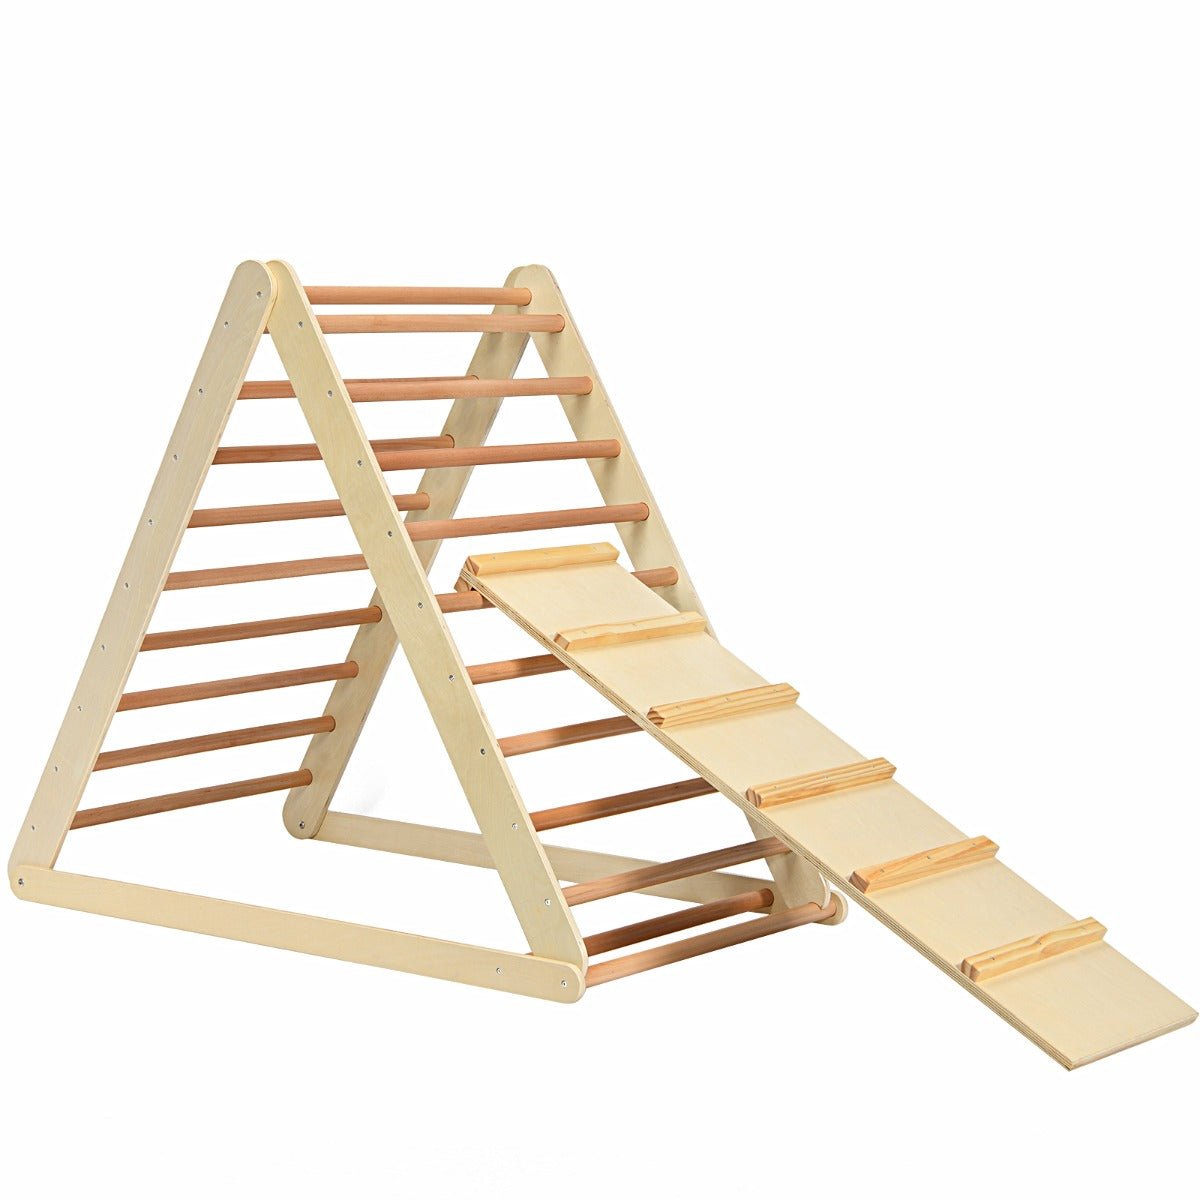 Secure Play with Wooden Climbing Triangle Ladder - Natural and Reliable